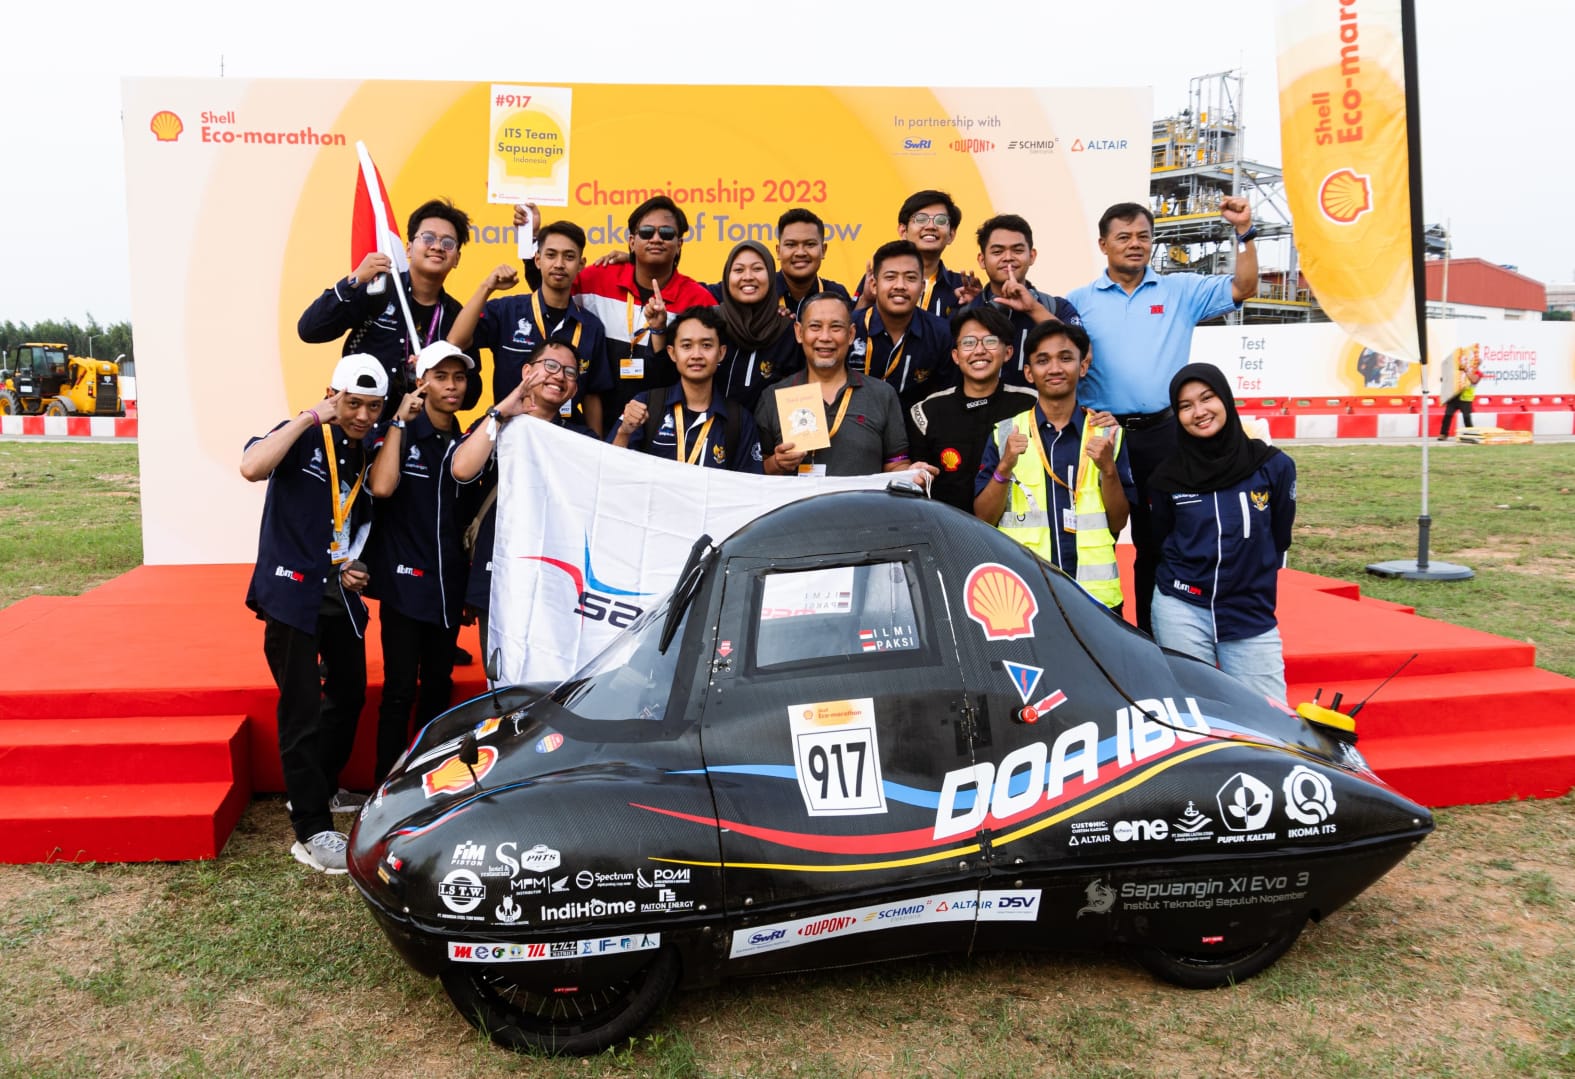 The ITS Sapuangin team won 3rd place in the world at the Shell Eco-Marathon 2023